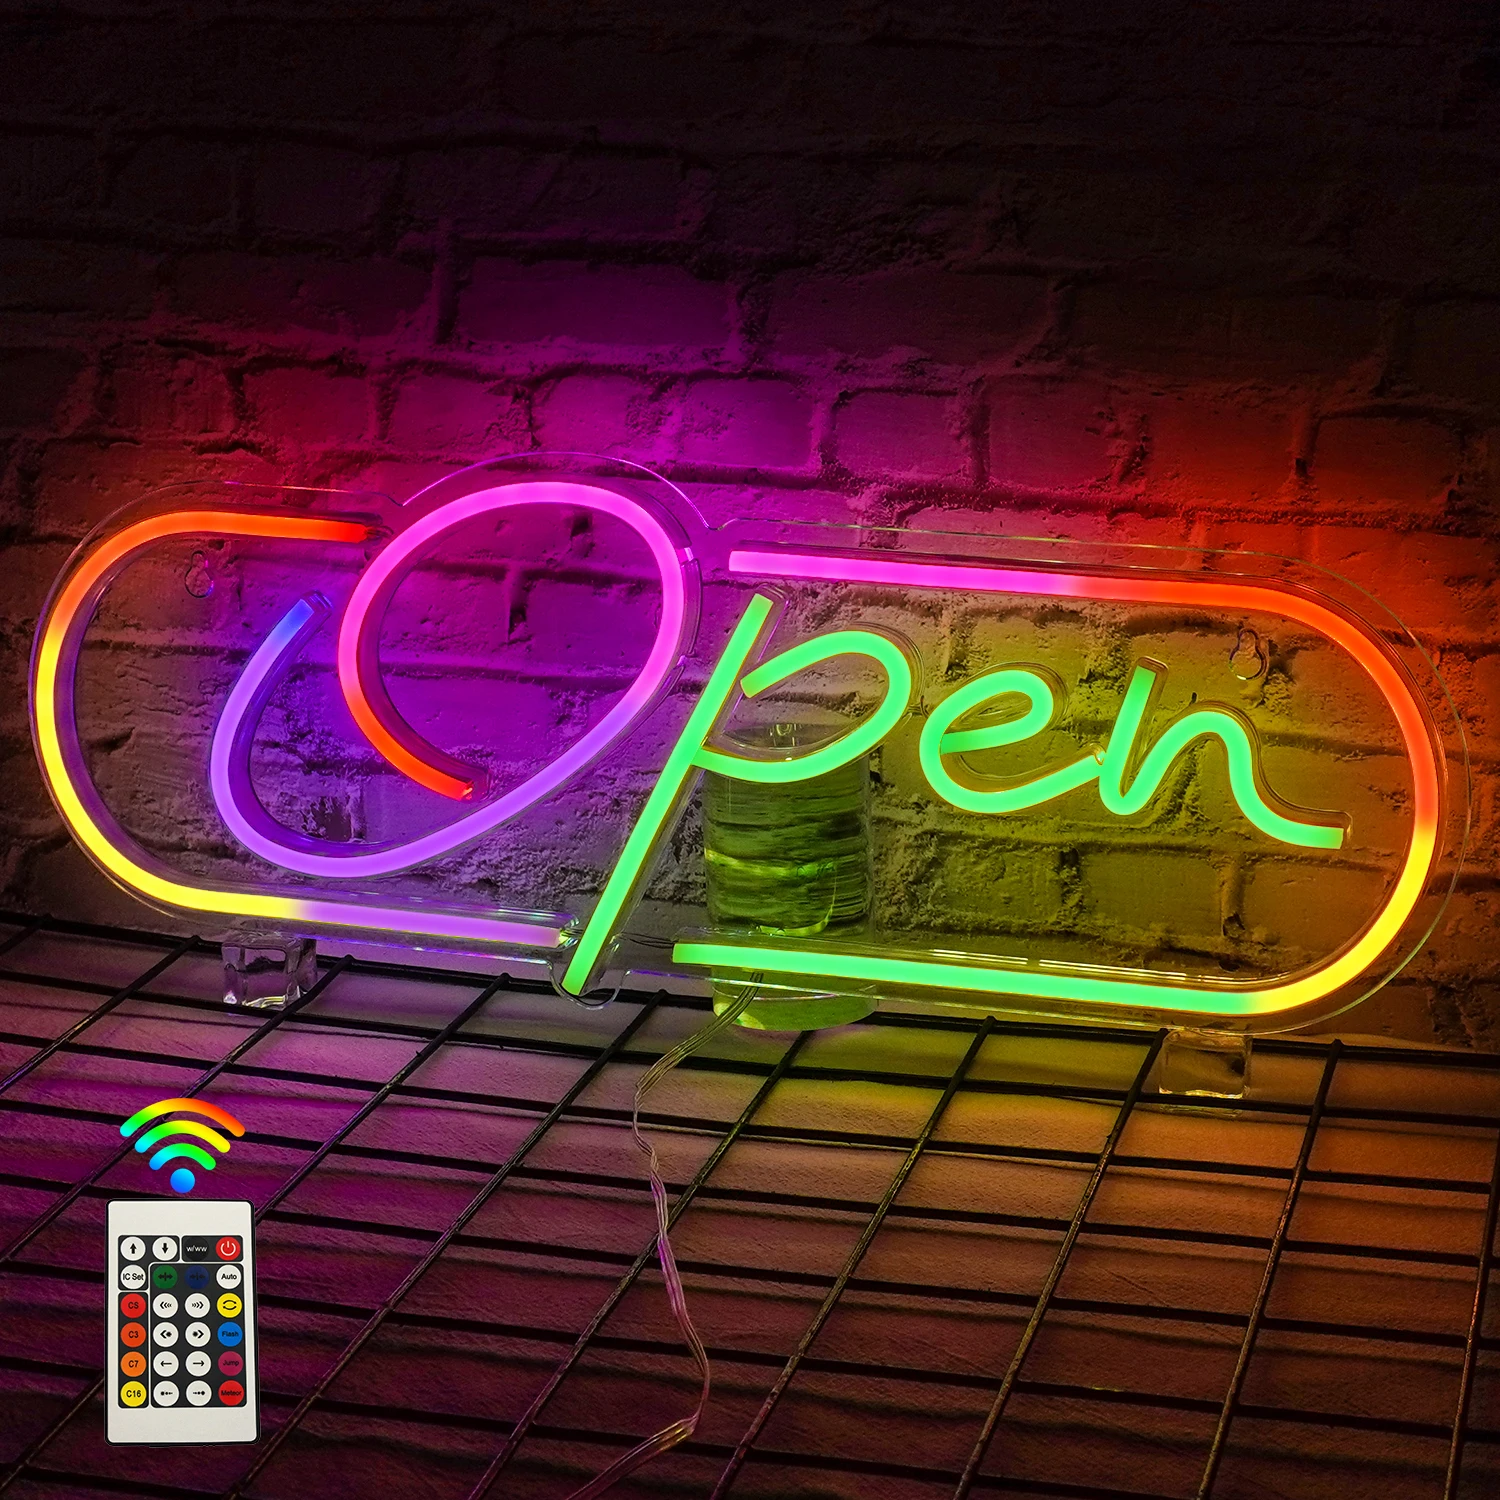 

Open Neon Signs LED Lights Adjustable In Multiple Colors Room Decoration For Home Bars Cafe Business Shop Welcome Light Up Sign